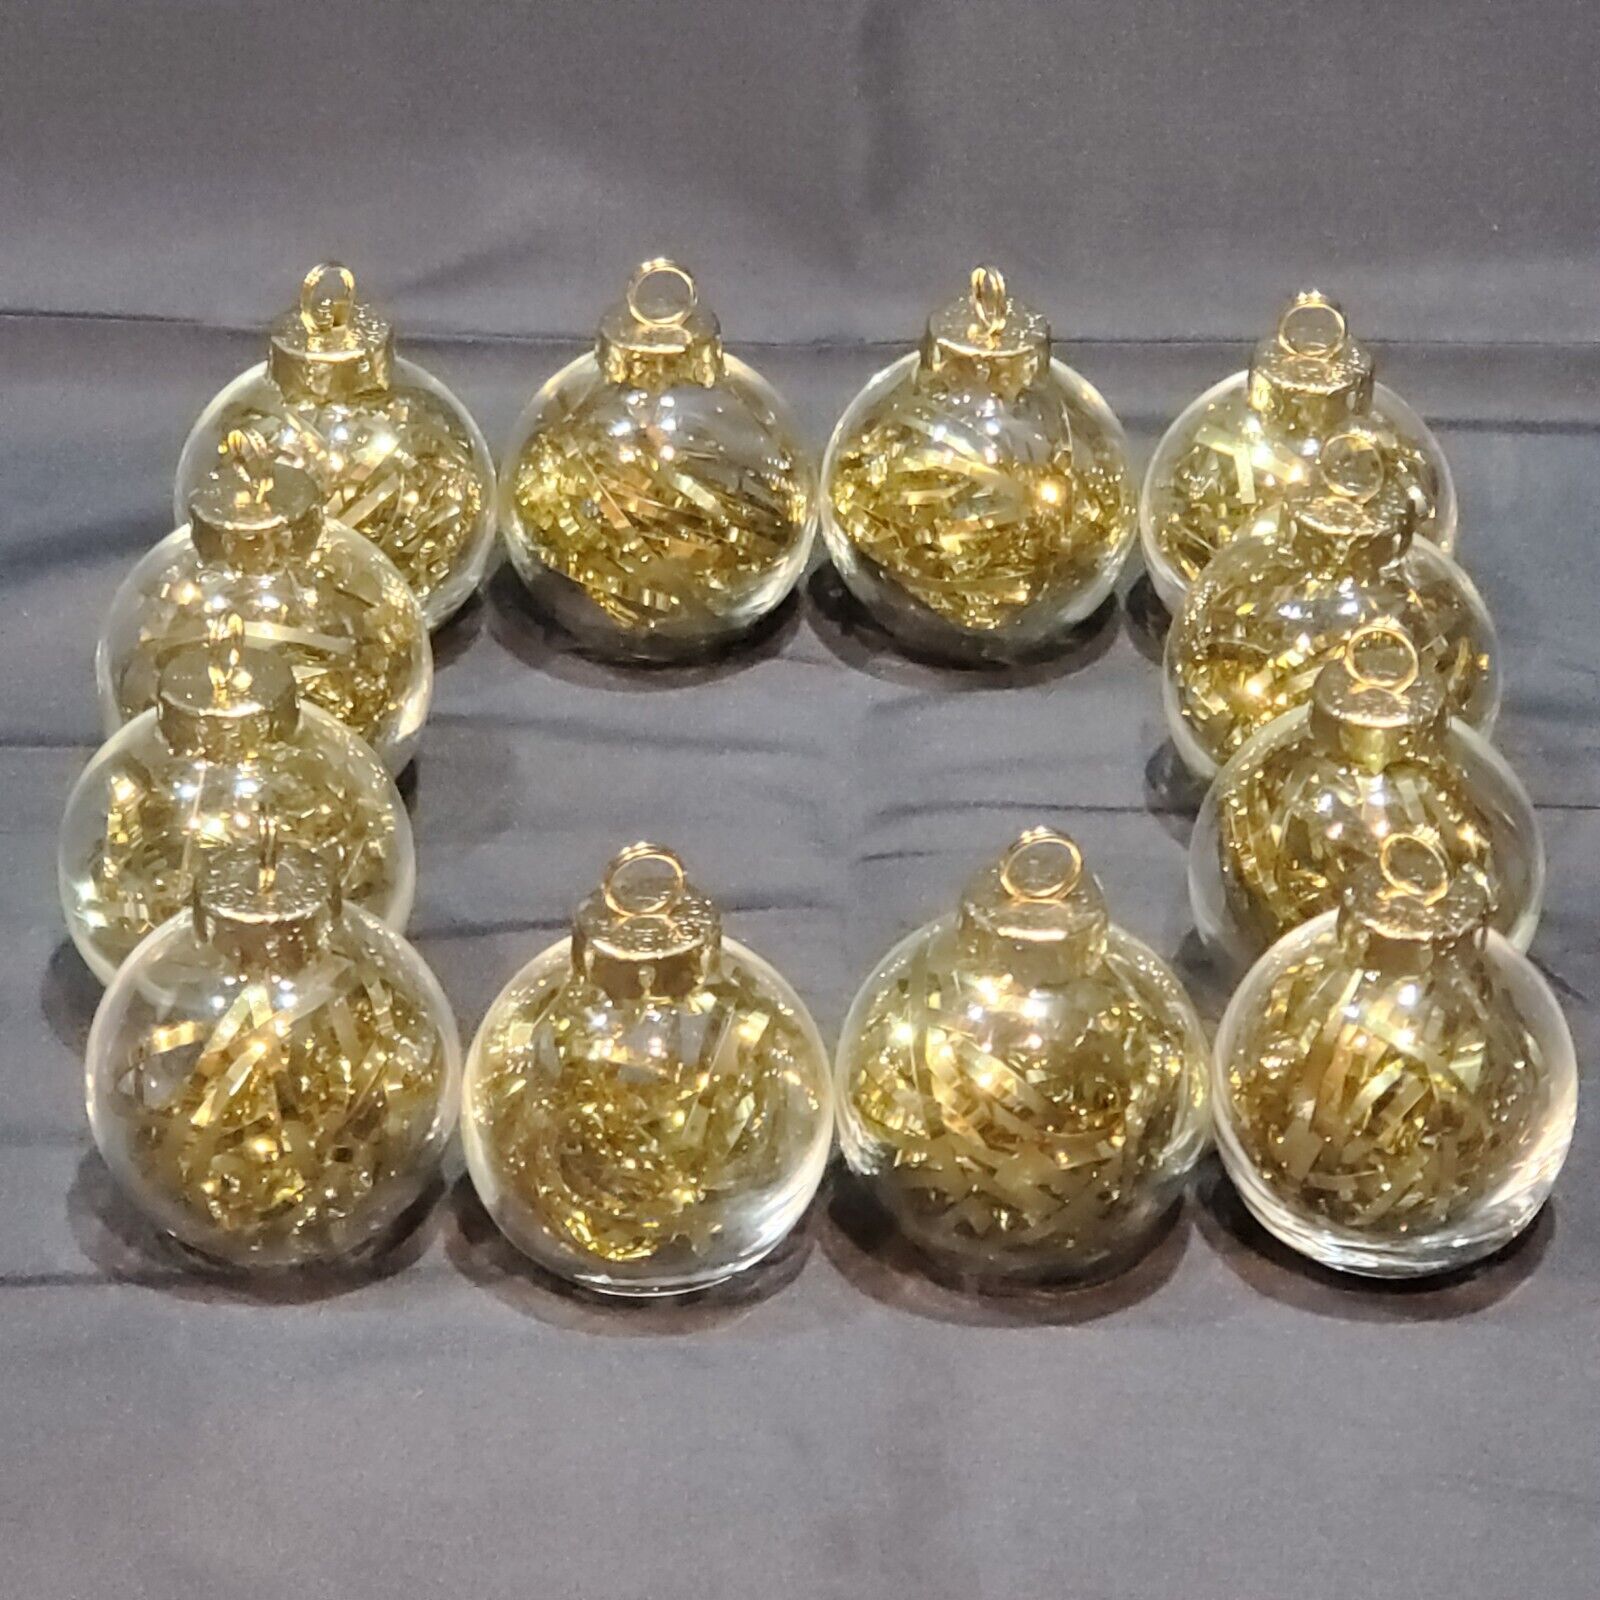 Lot of 12 Holiday Place Card Holder Ornaments Blown Glass Metallic Gold Tinsel